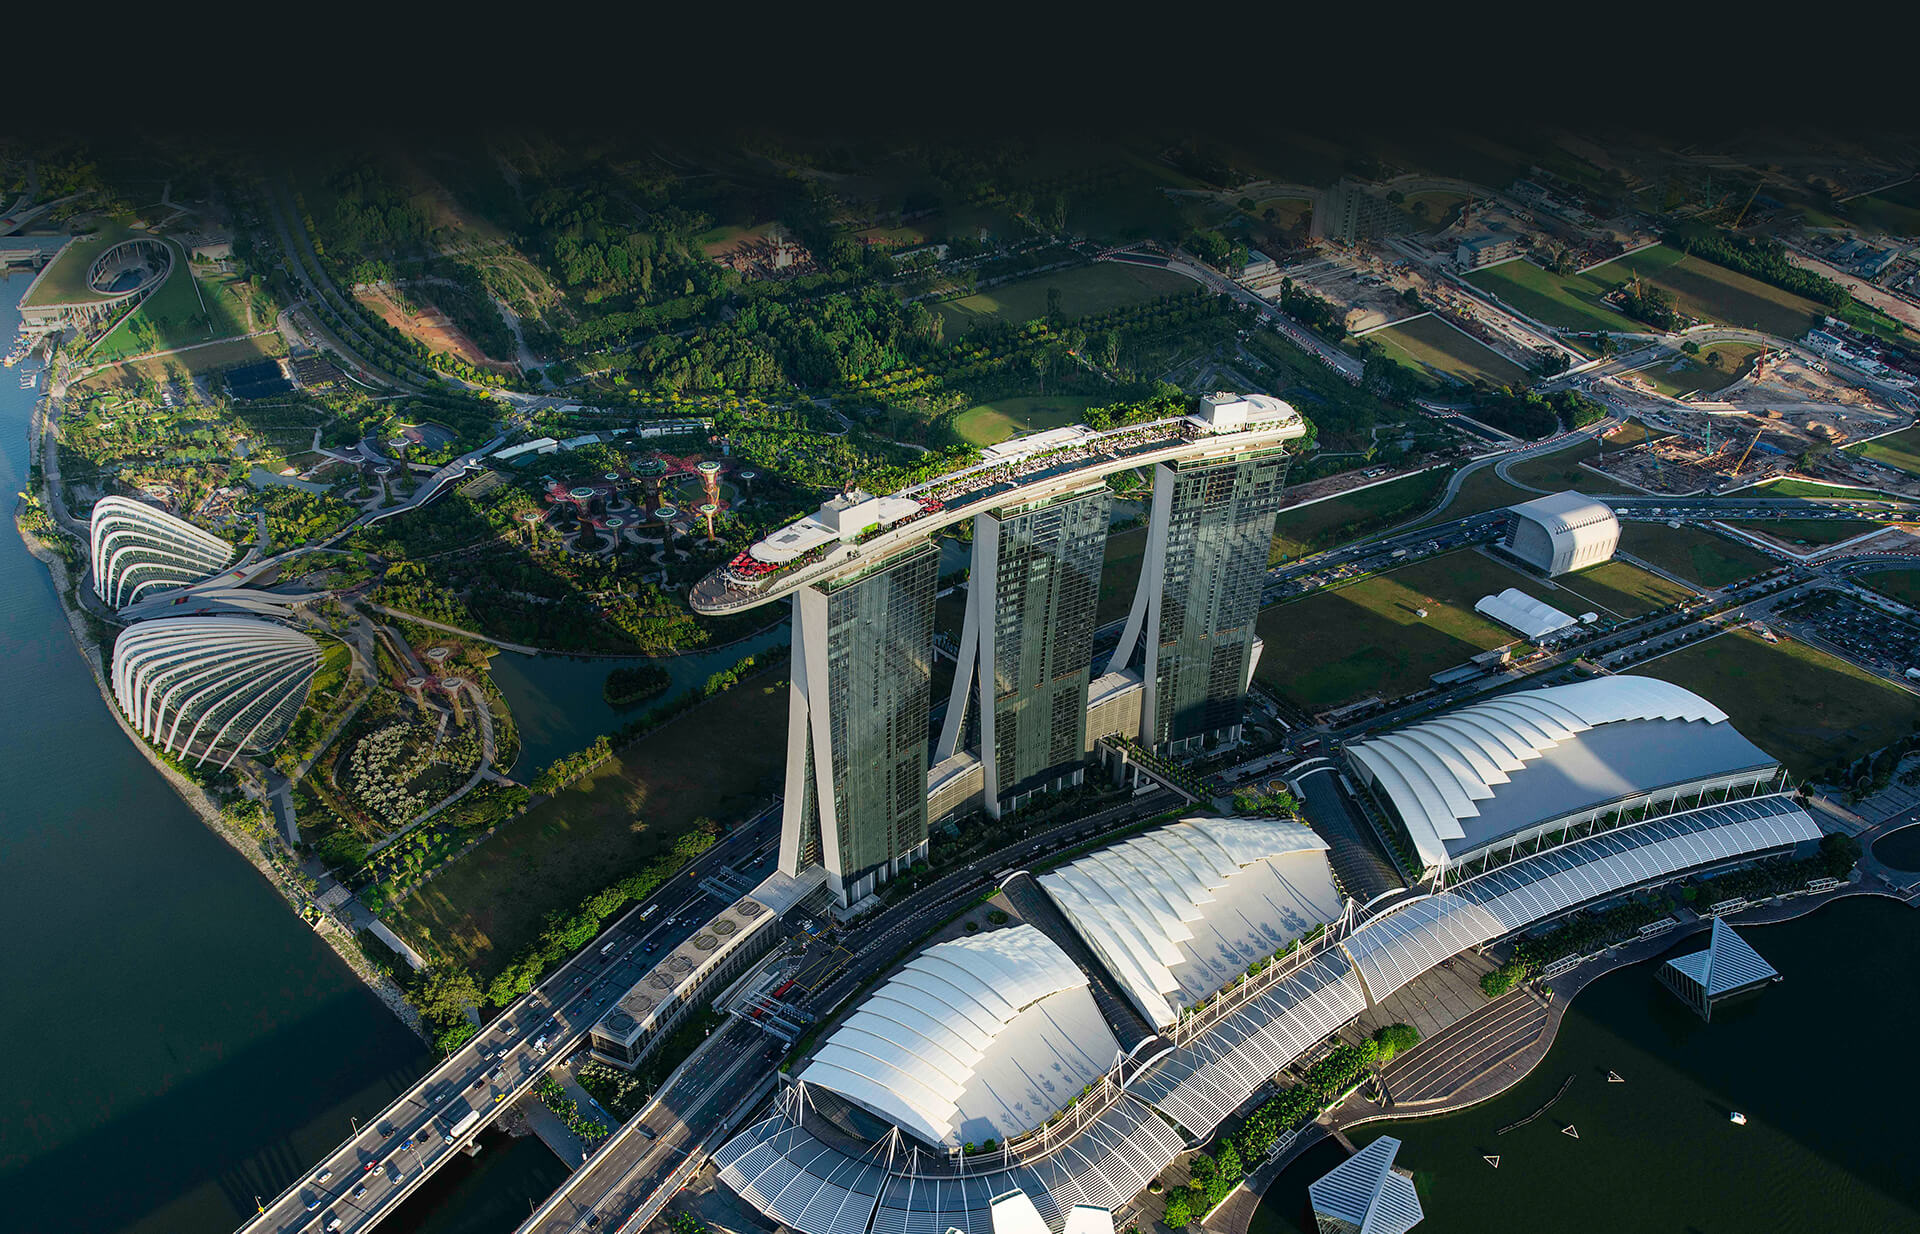 Overview of Marina Bay Sands